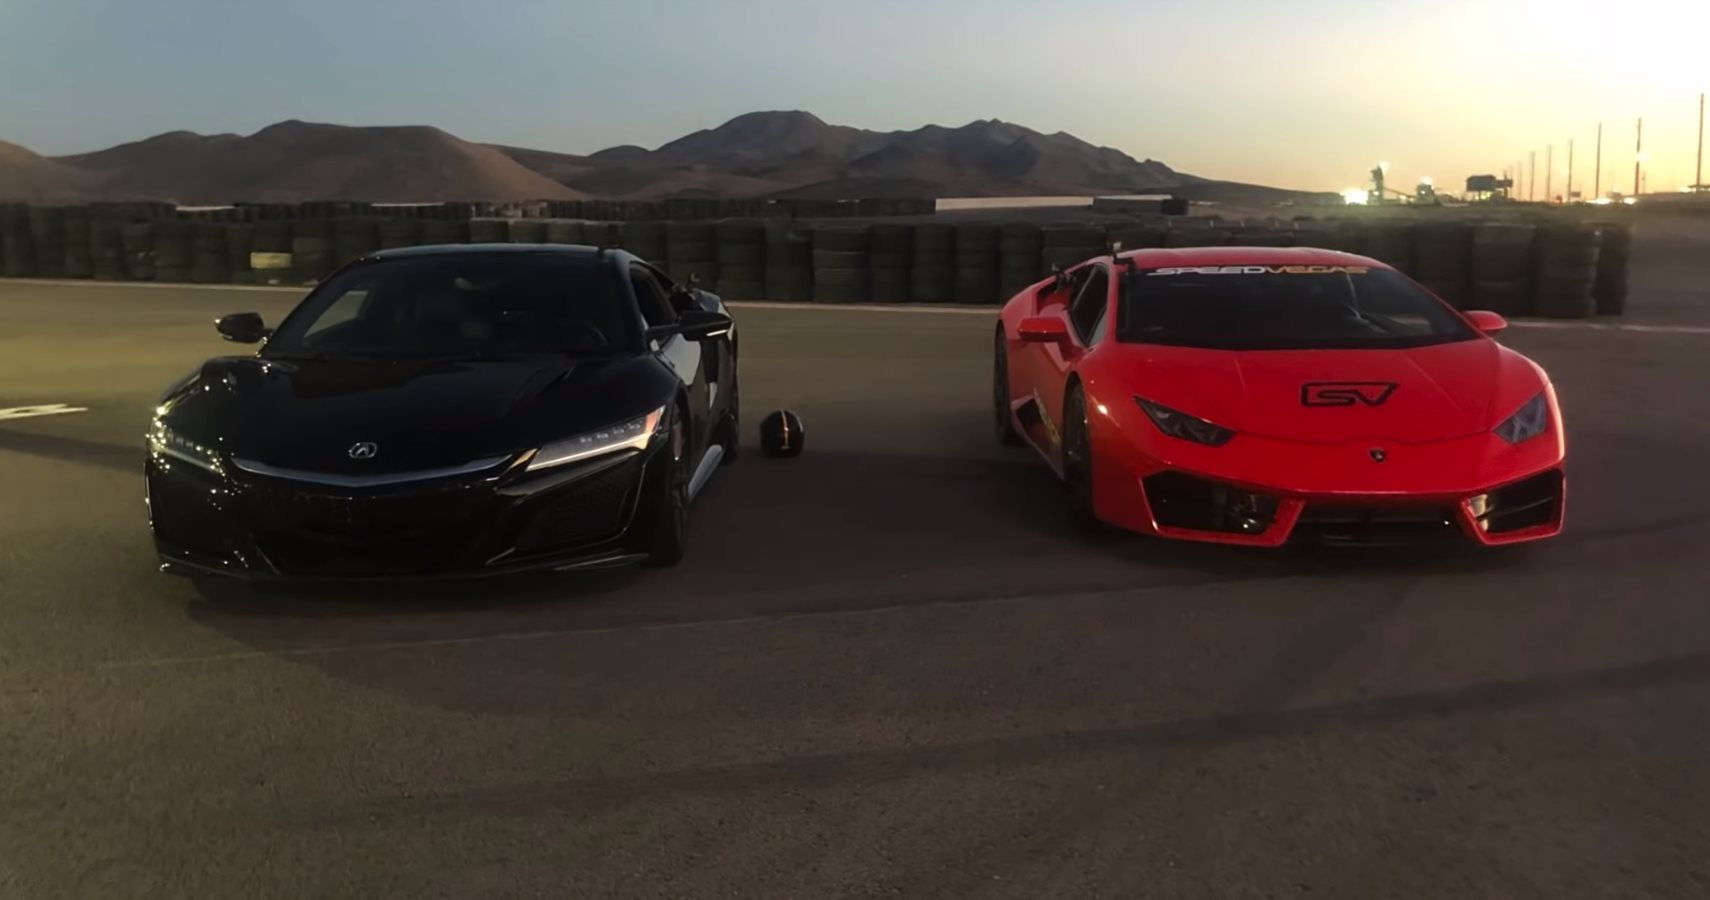 Watch A Lamborghini Huracan Get Destroyed By A Honda NSX On The Drag Strip